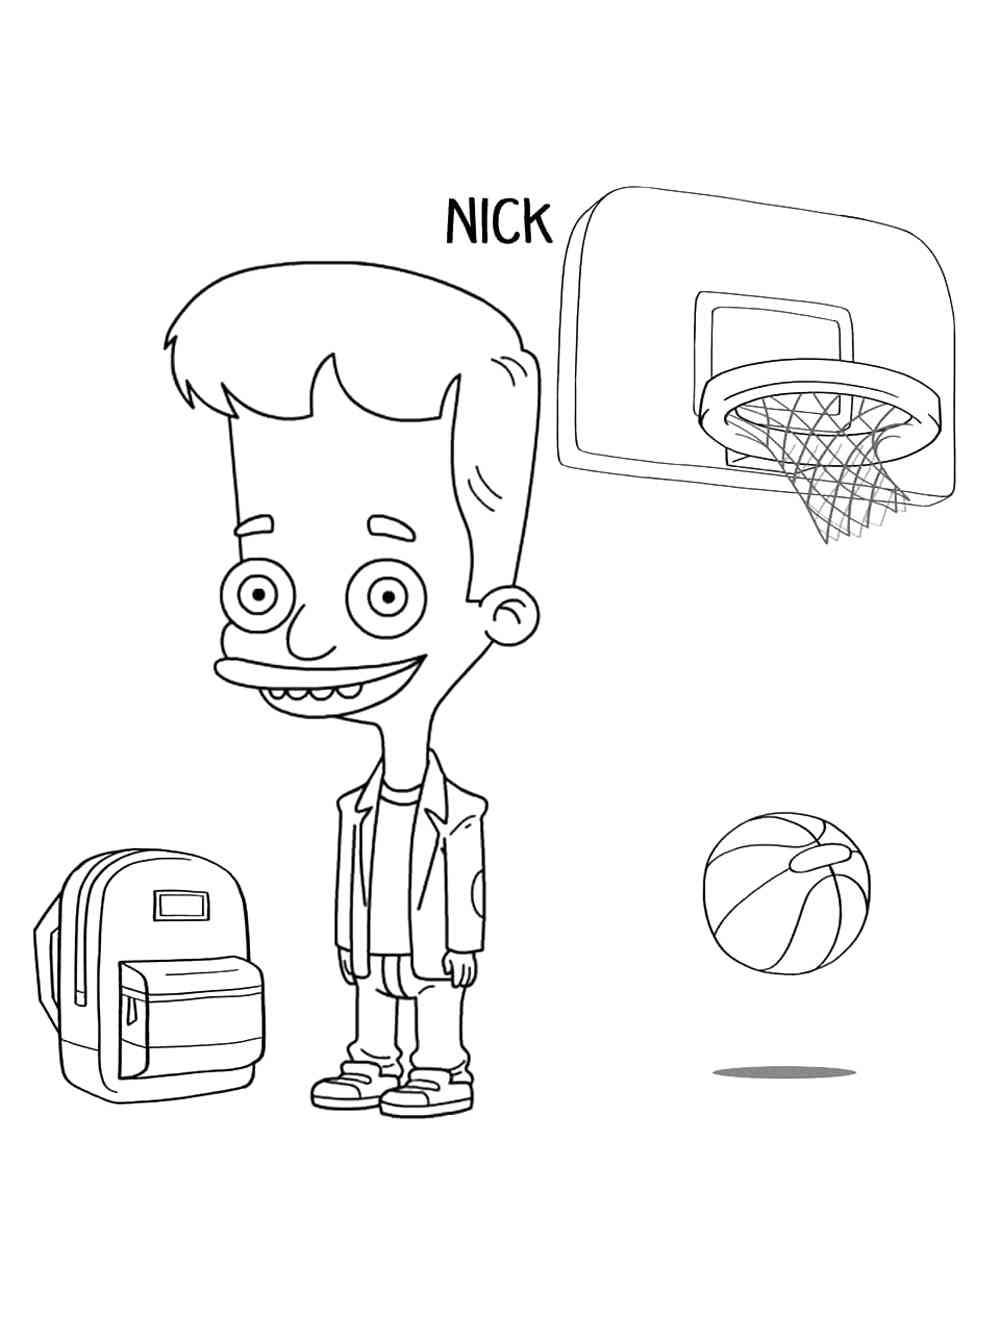 Nick from Big Mouth coloring page